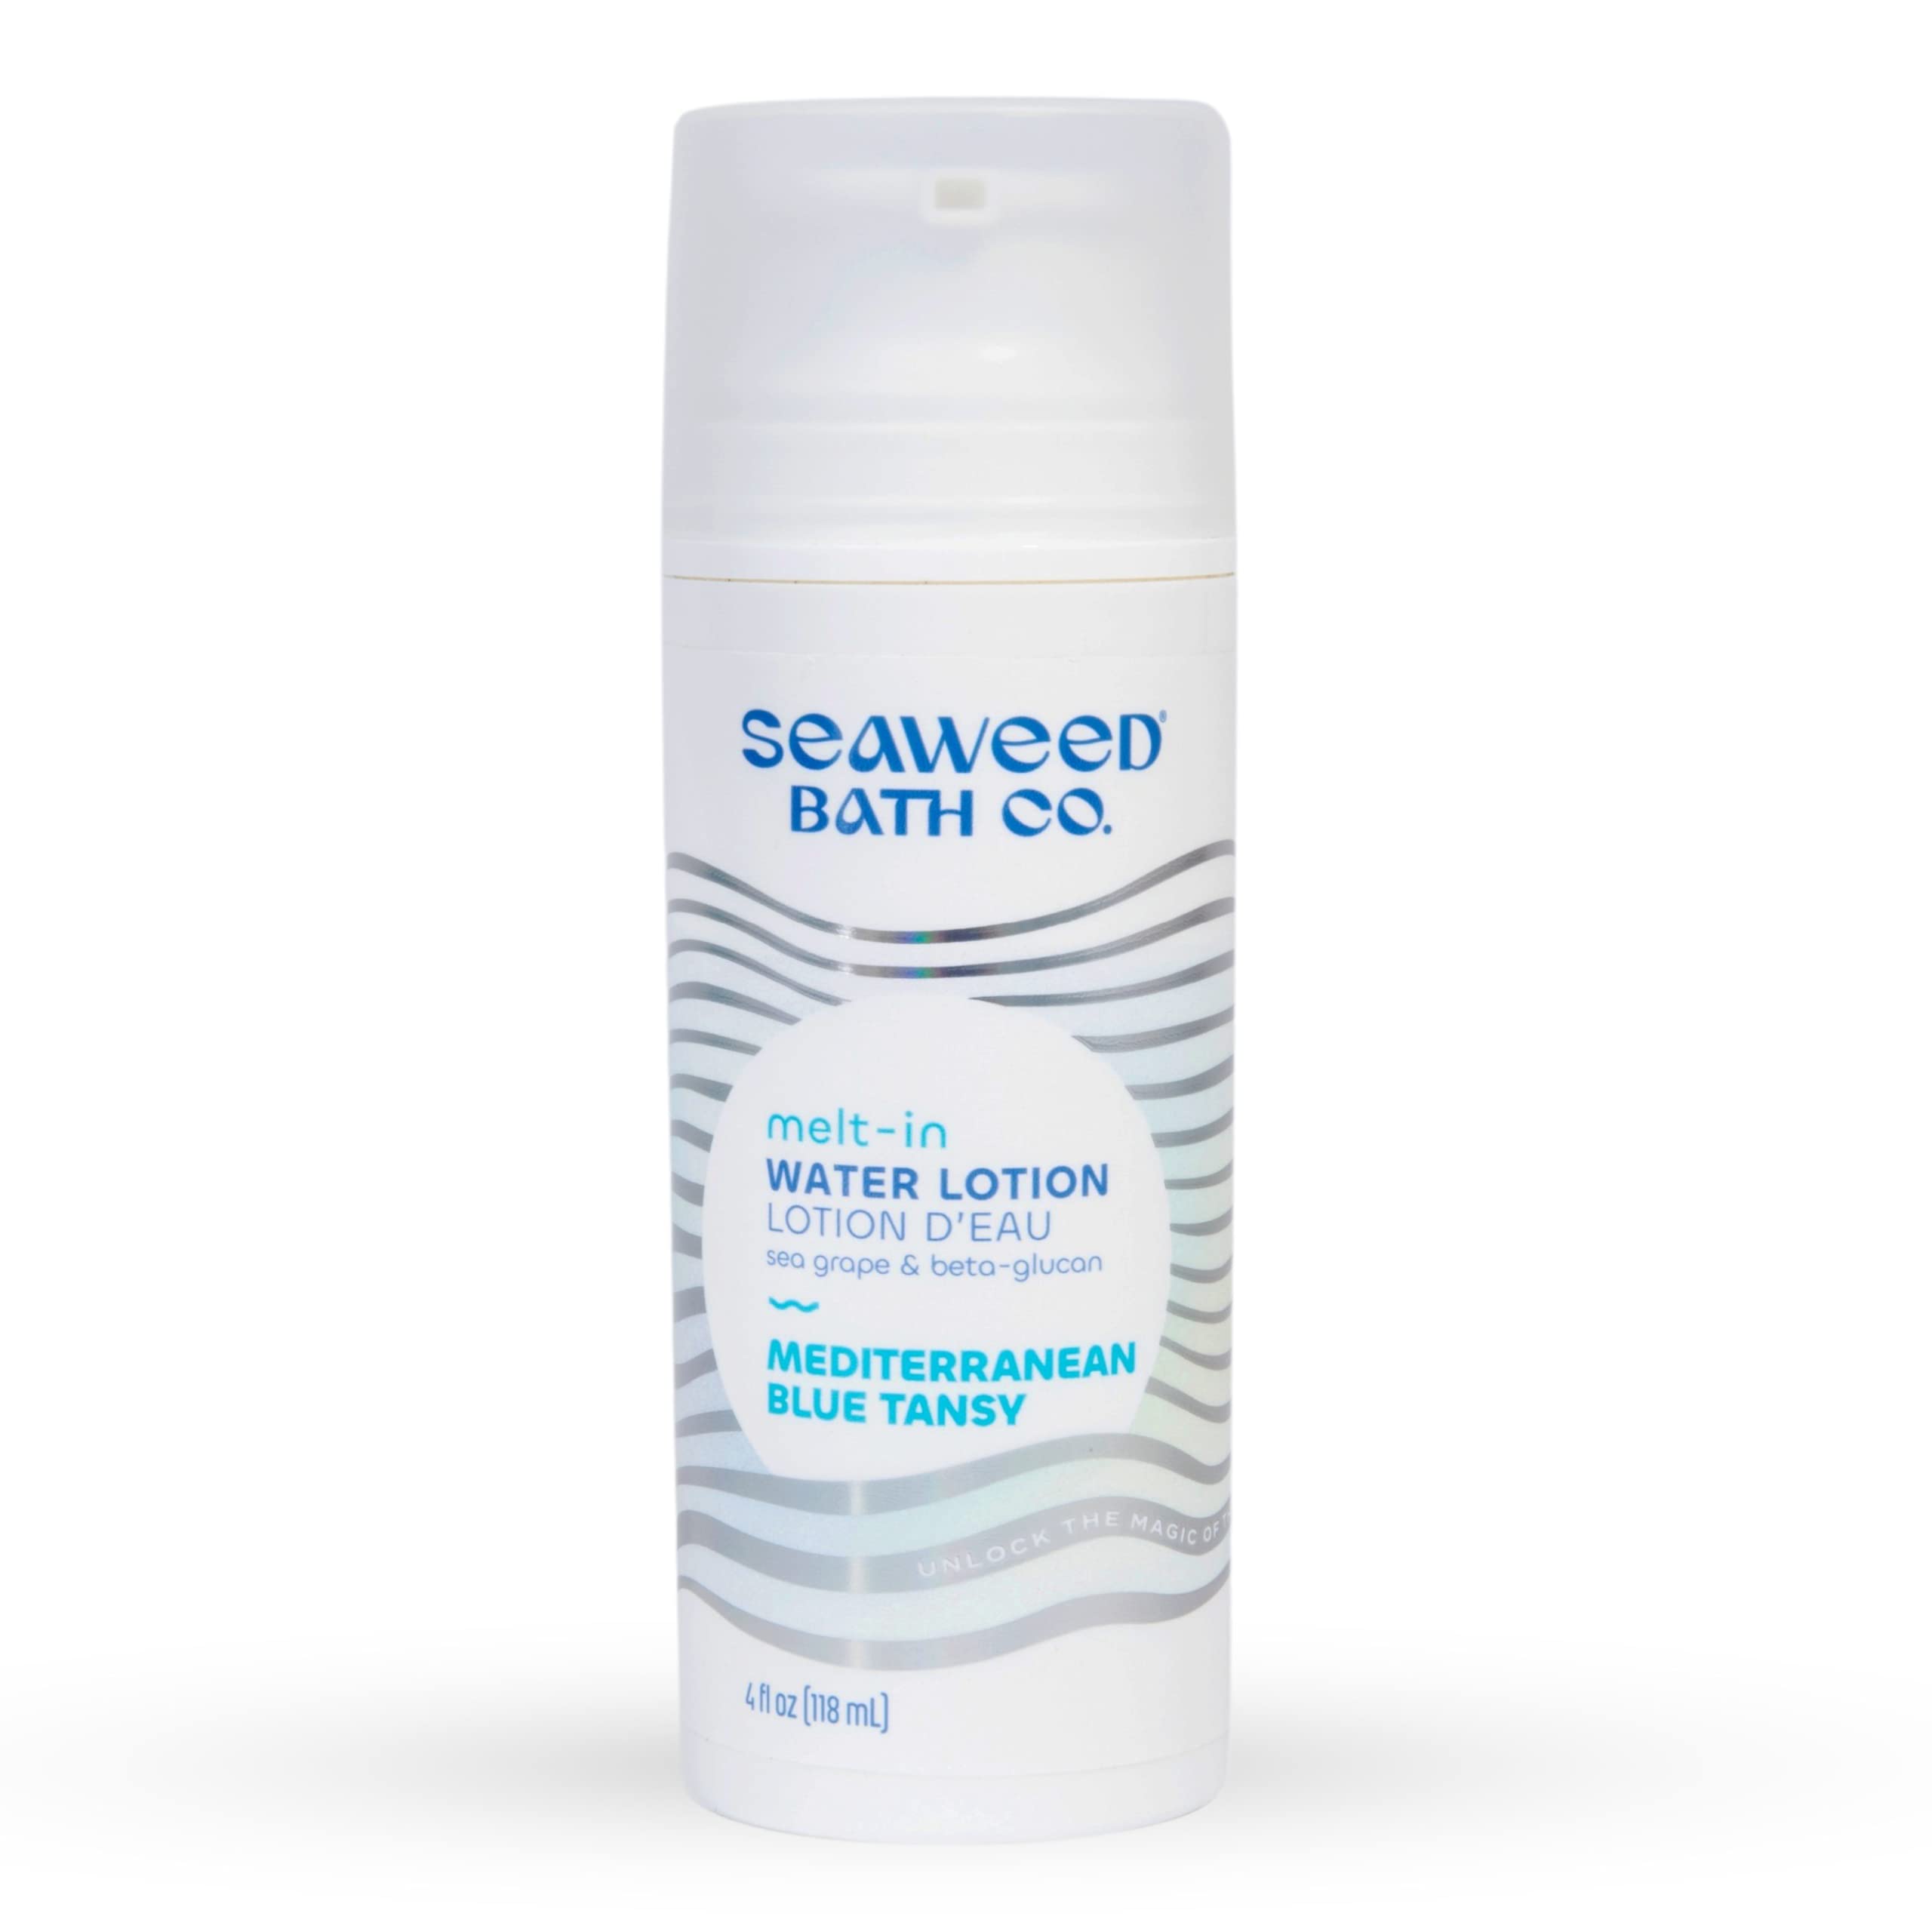 Seaweed Bath Co. Melt-in Water Lotion, Mediterranean Blue Tansy Scent, 4 Ounce, Sustainably Harvested Seaweed, Sea Grape, Beta-Glucan